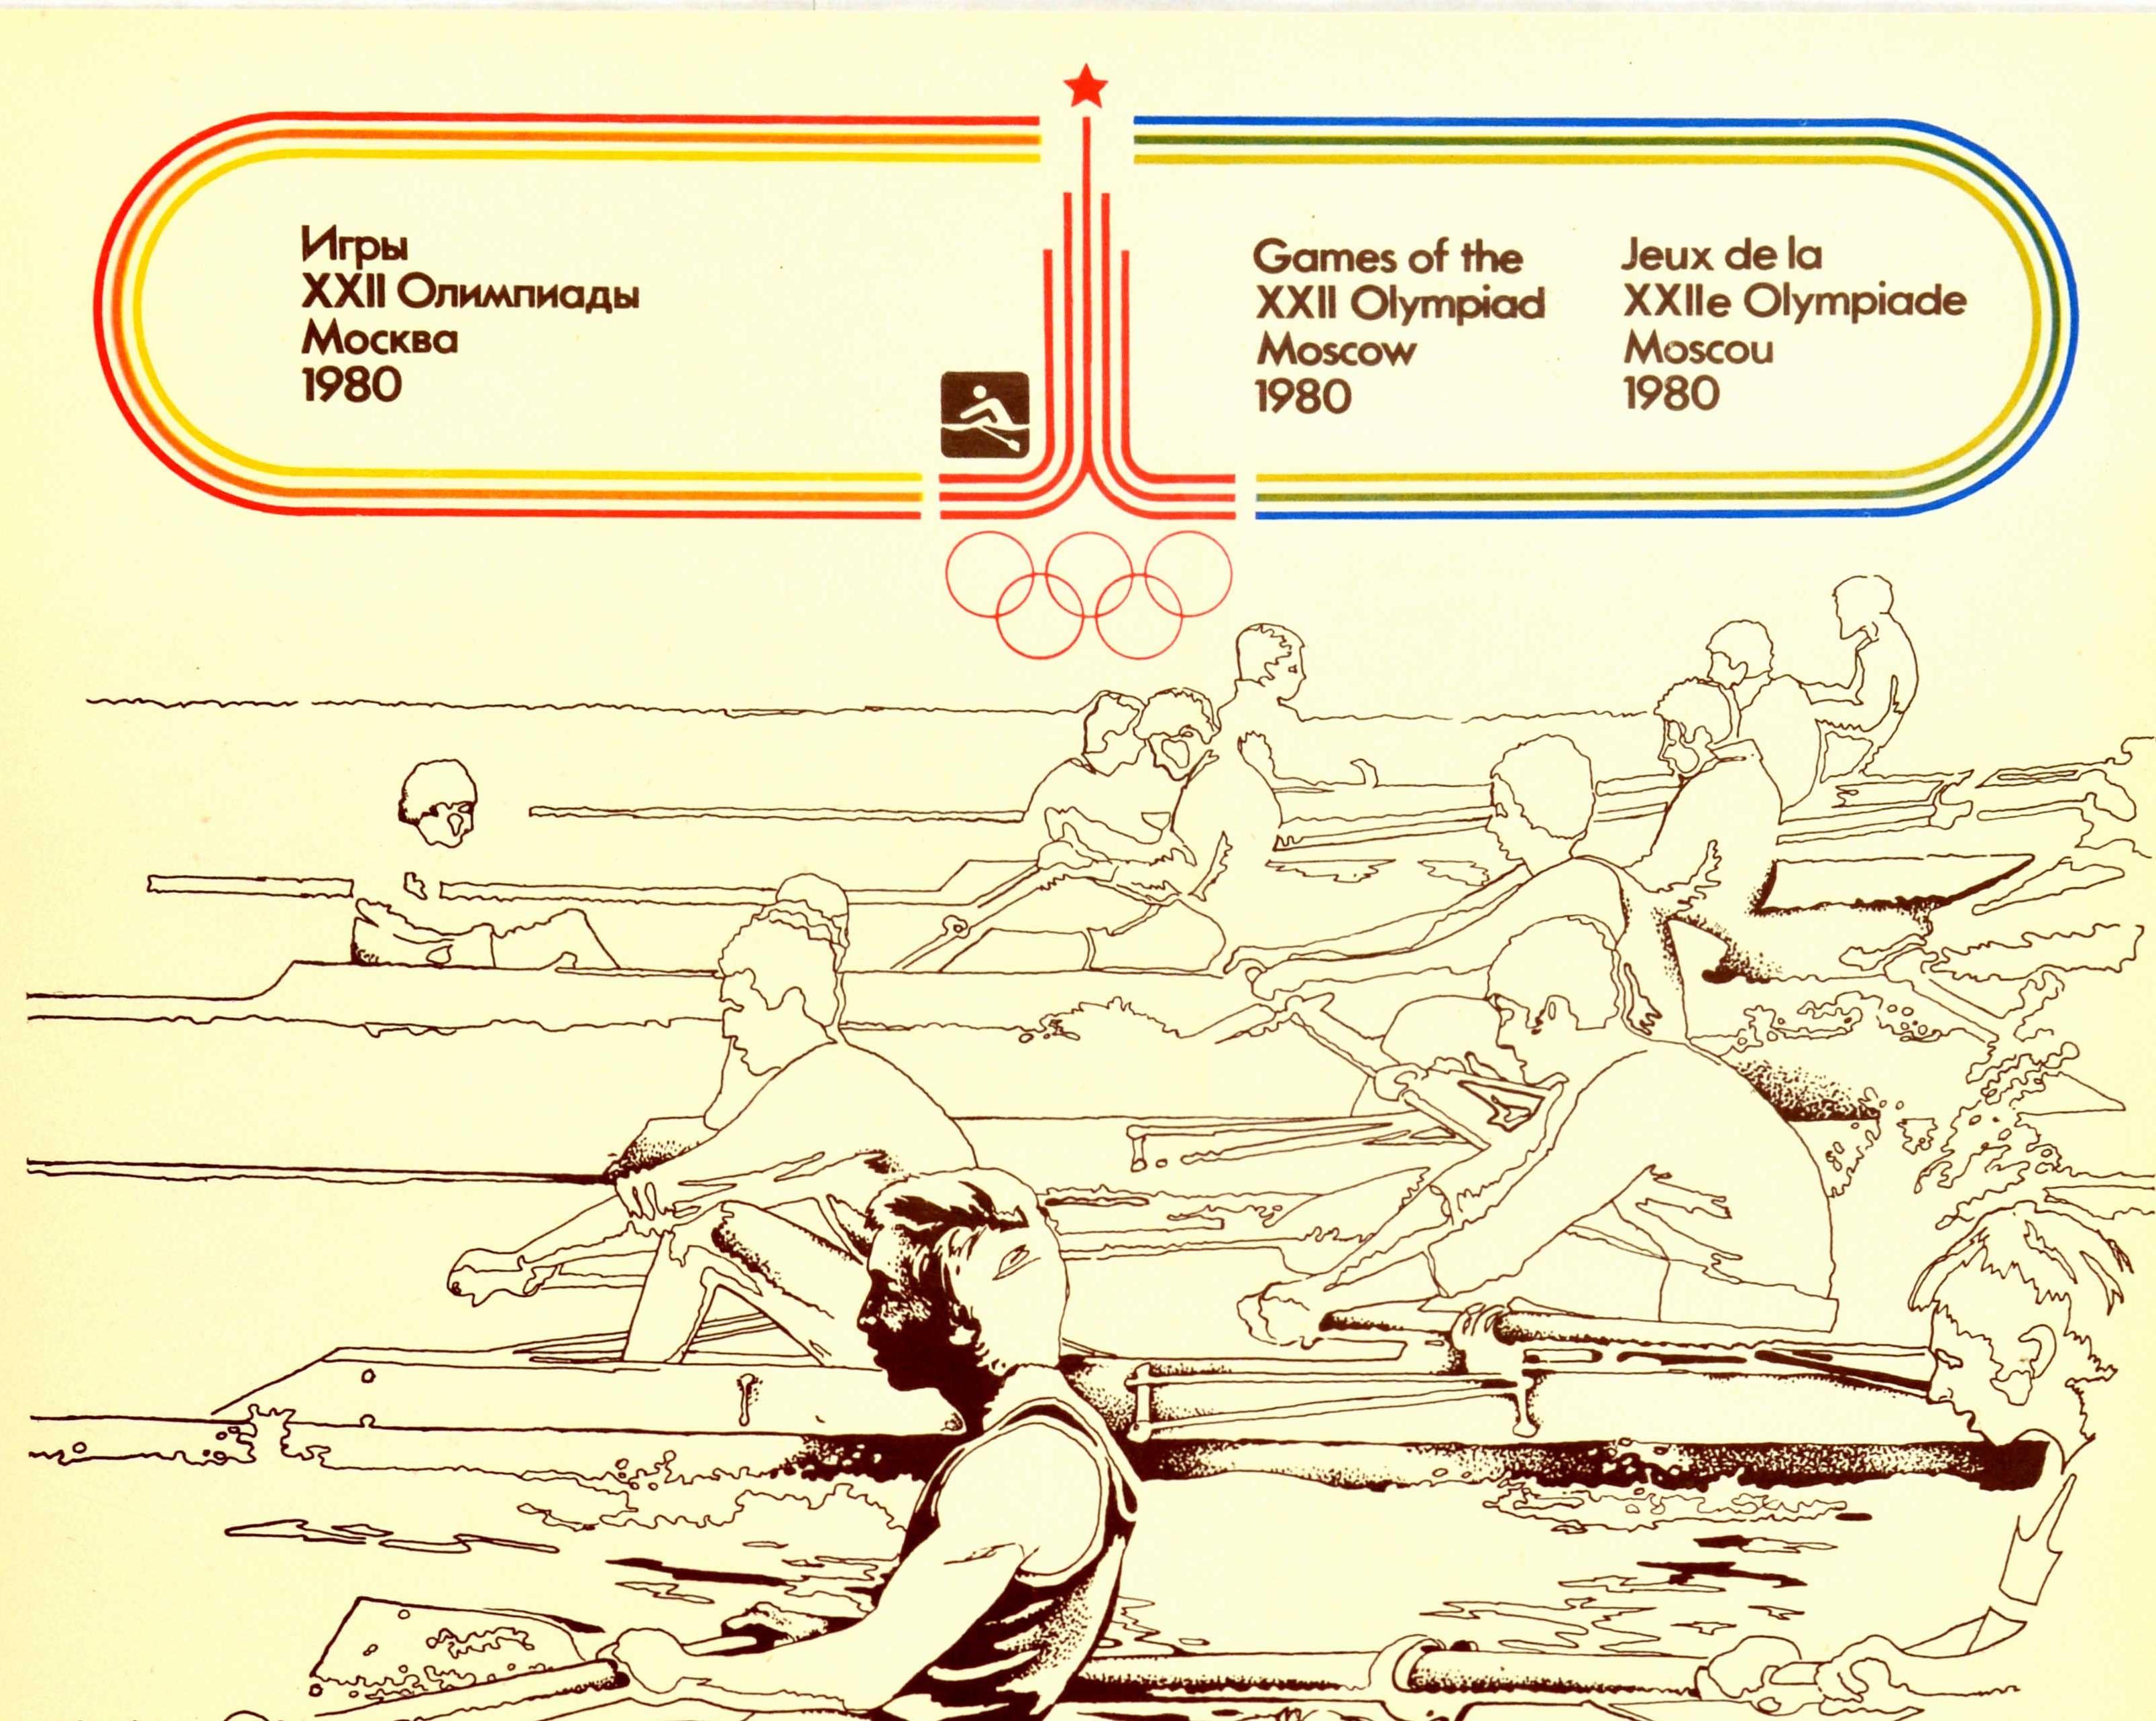 Original Vintage Poster Summer Olympic Games Moscow 1980 Russia Rowing Sport Art - Print by Karmatskiy